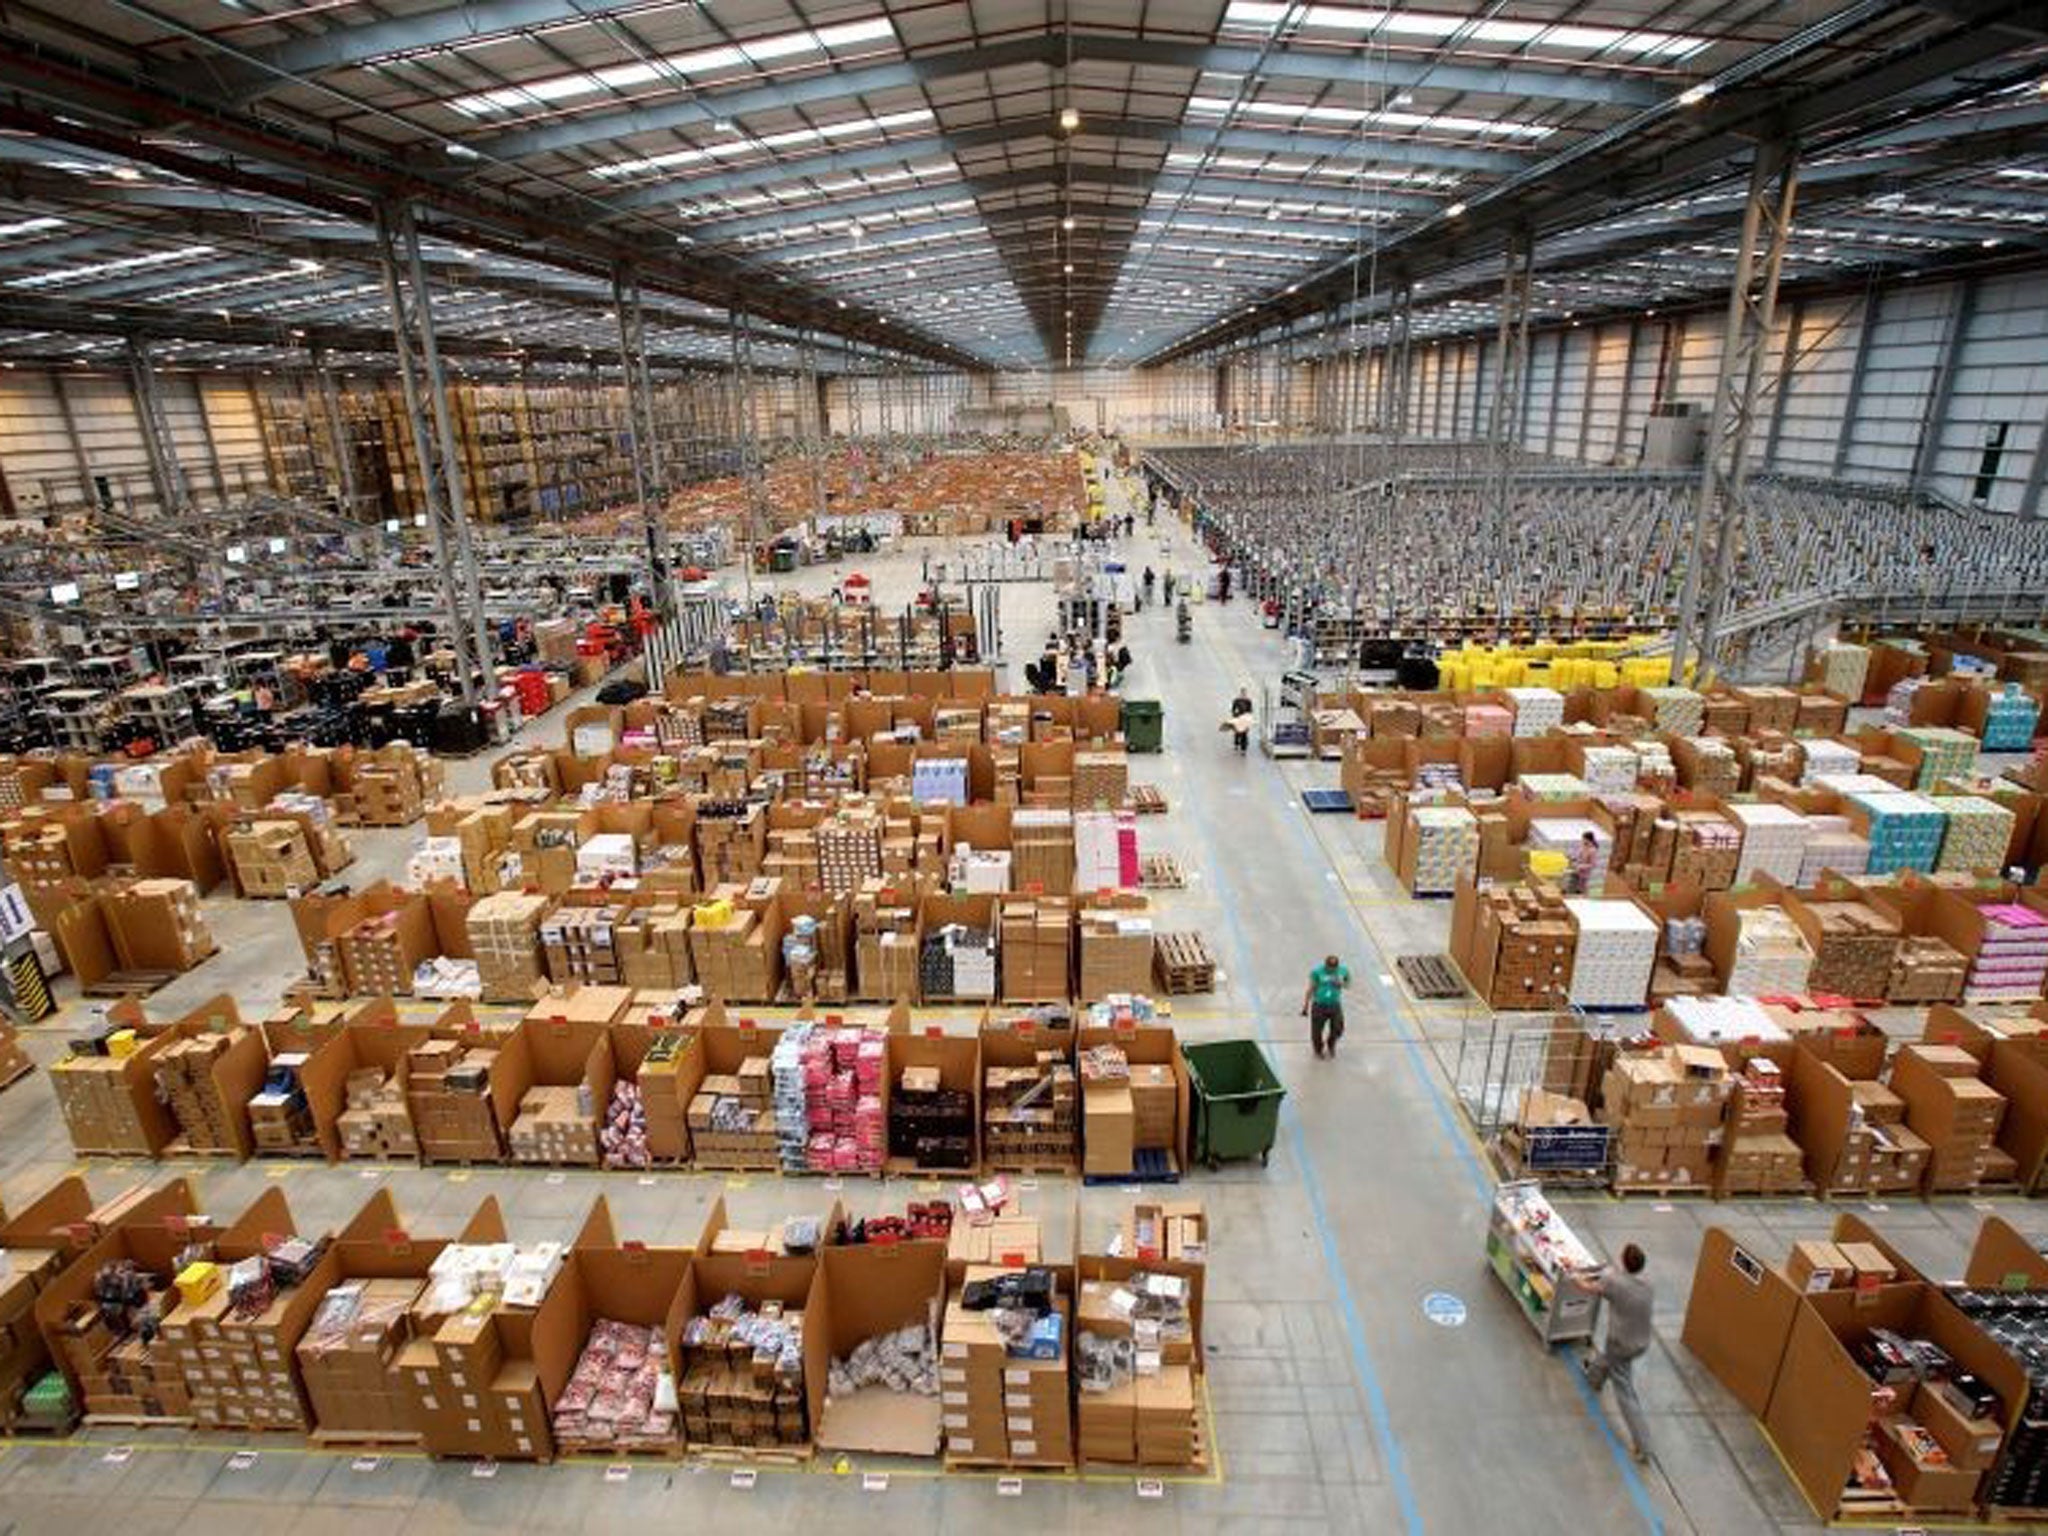 The Amazon delivery centre in Peterborough, Cambridgeshire, is prepared for Cyber Monday